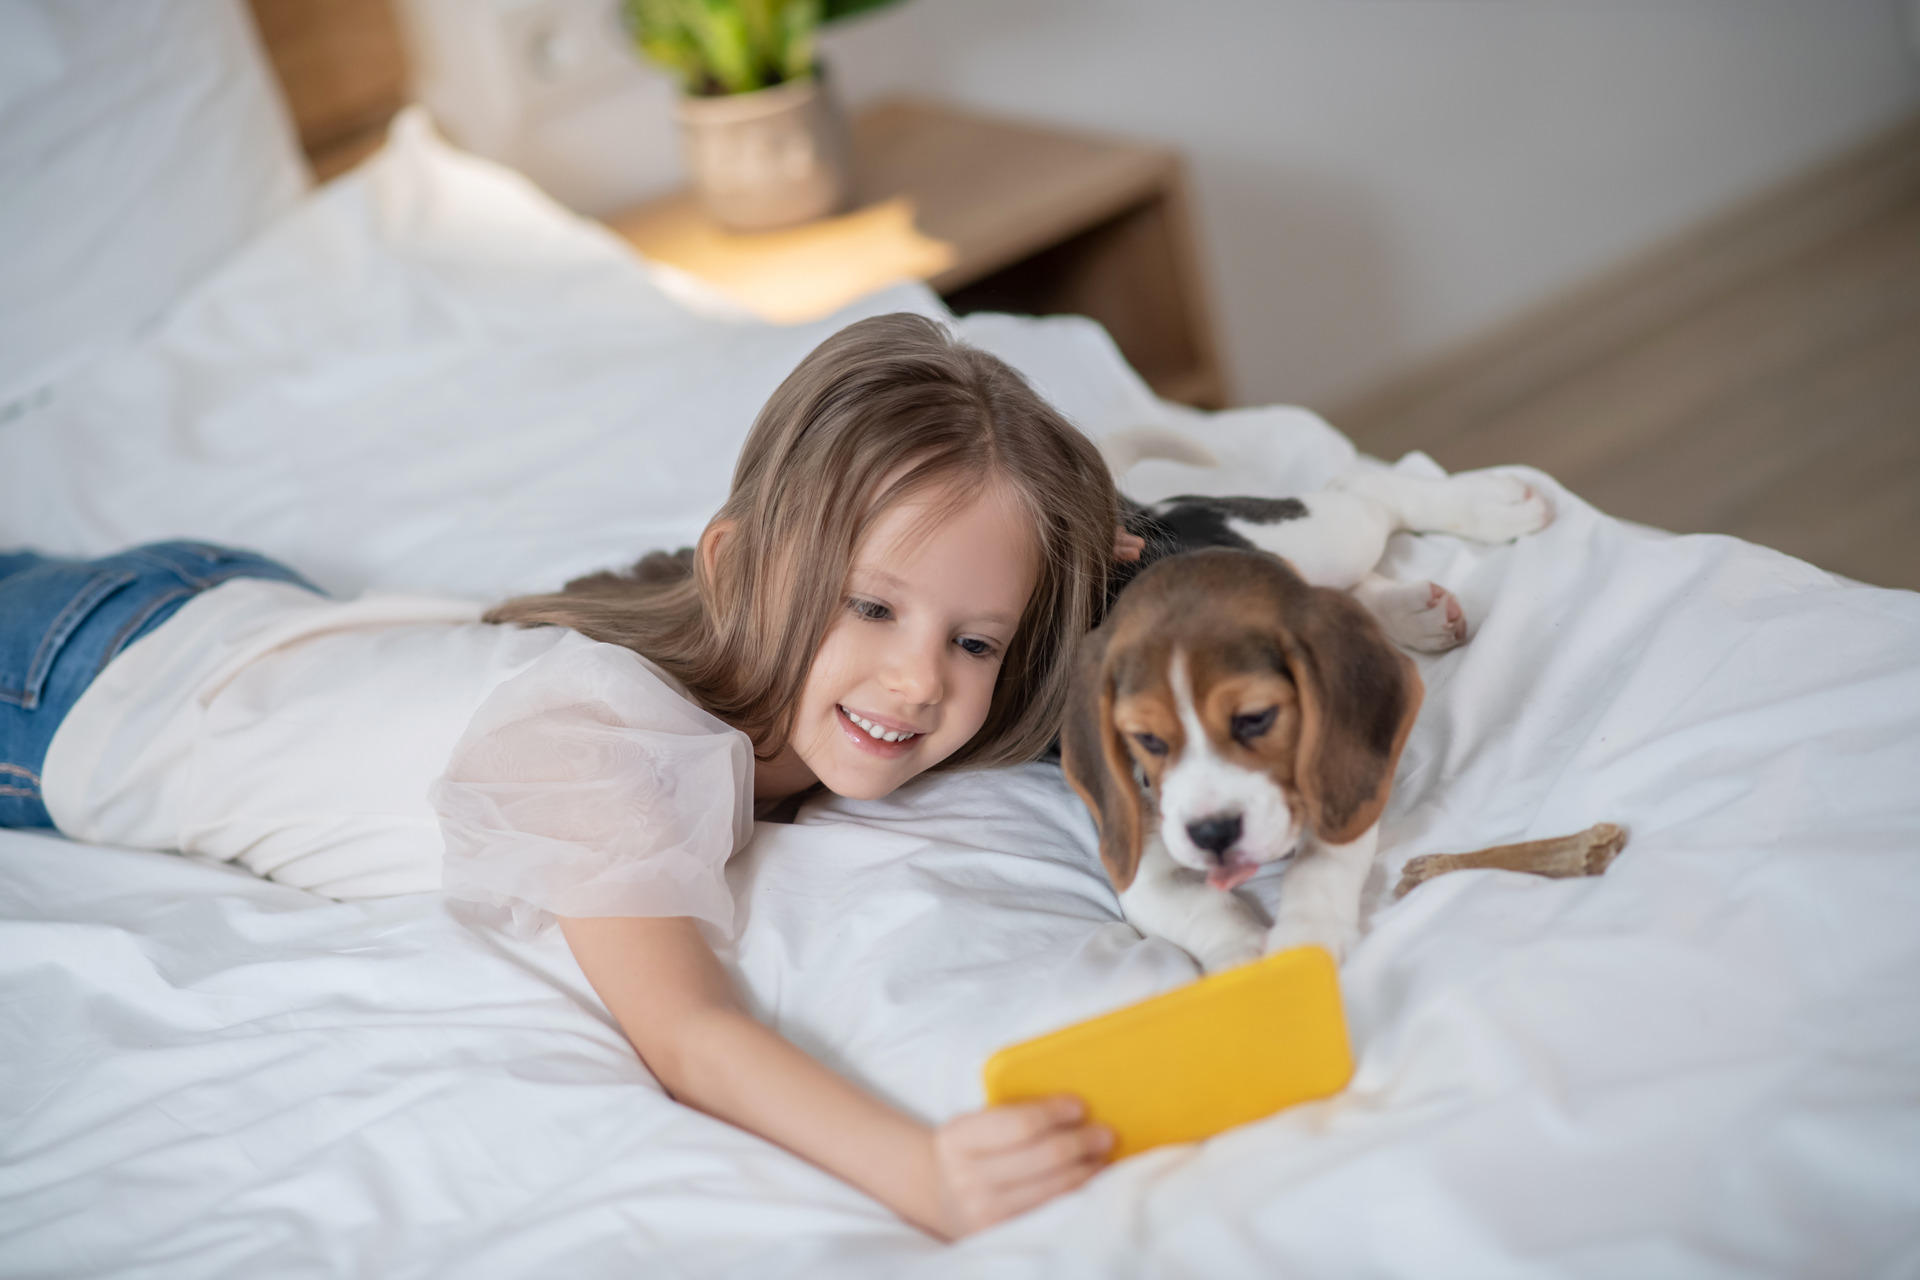 A child distracting a dog from a loud noise by watching a video together